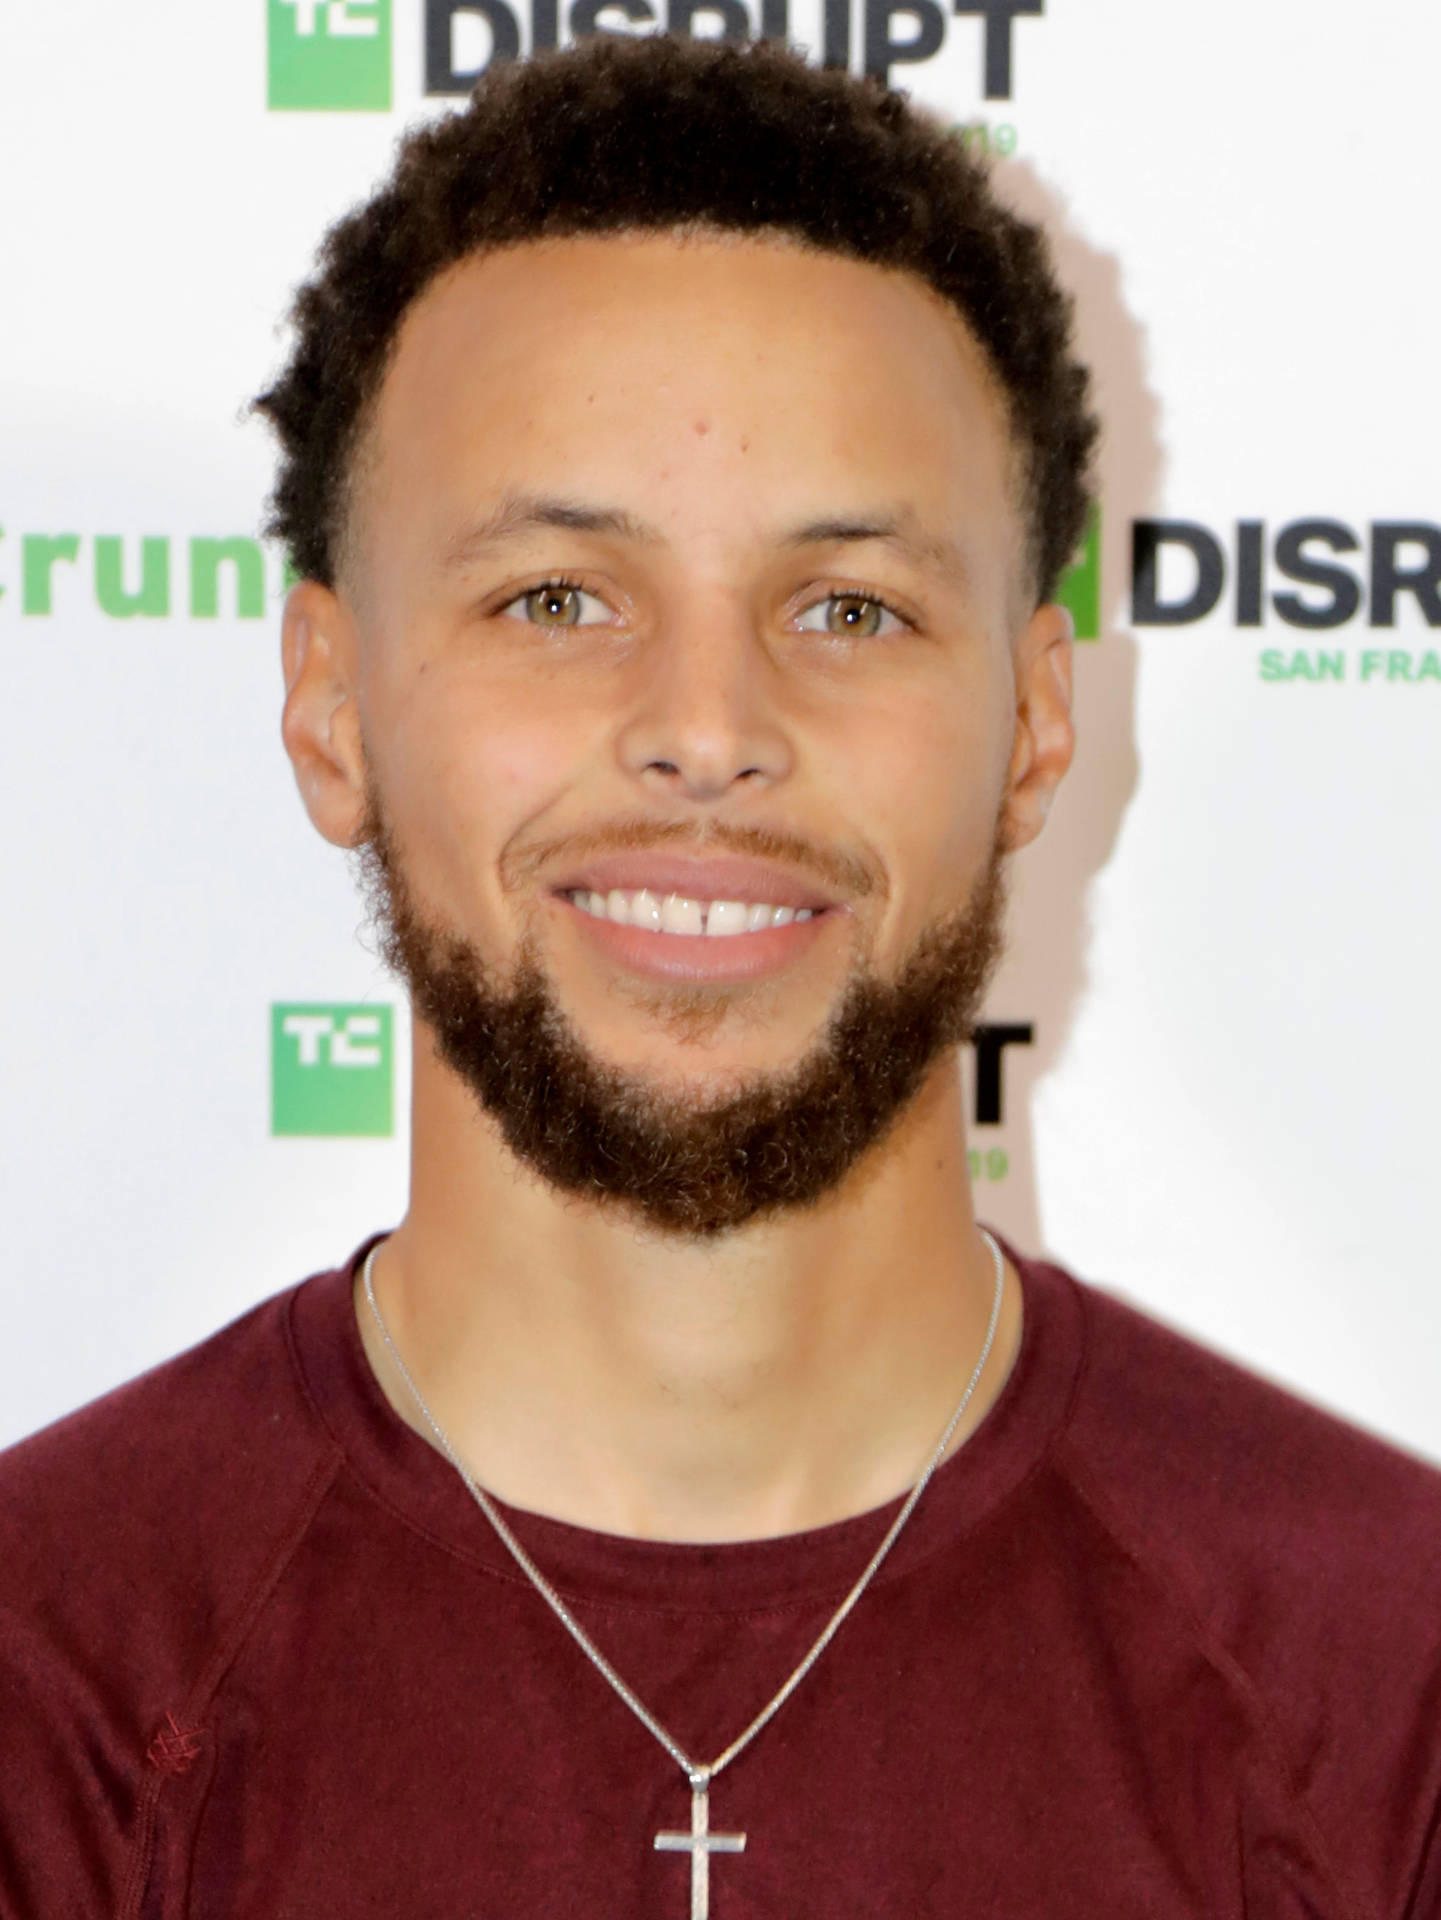 Steph Curry At Techcrunch's Disrupt Sf Conference Wallpaper